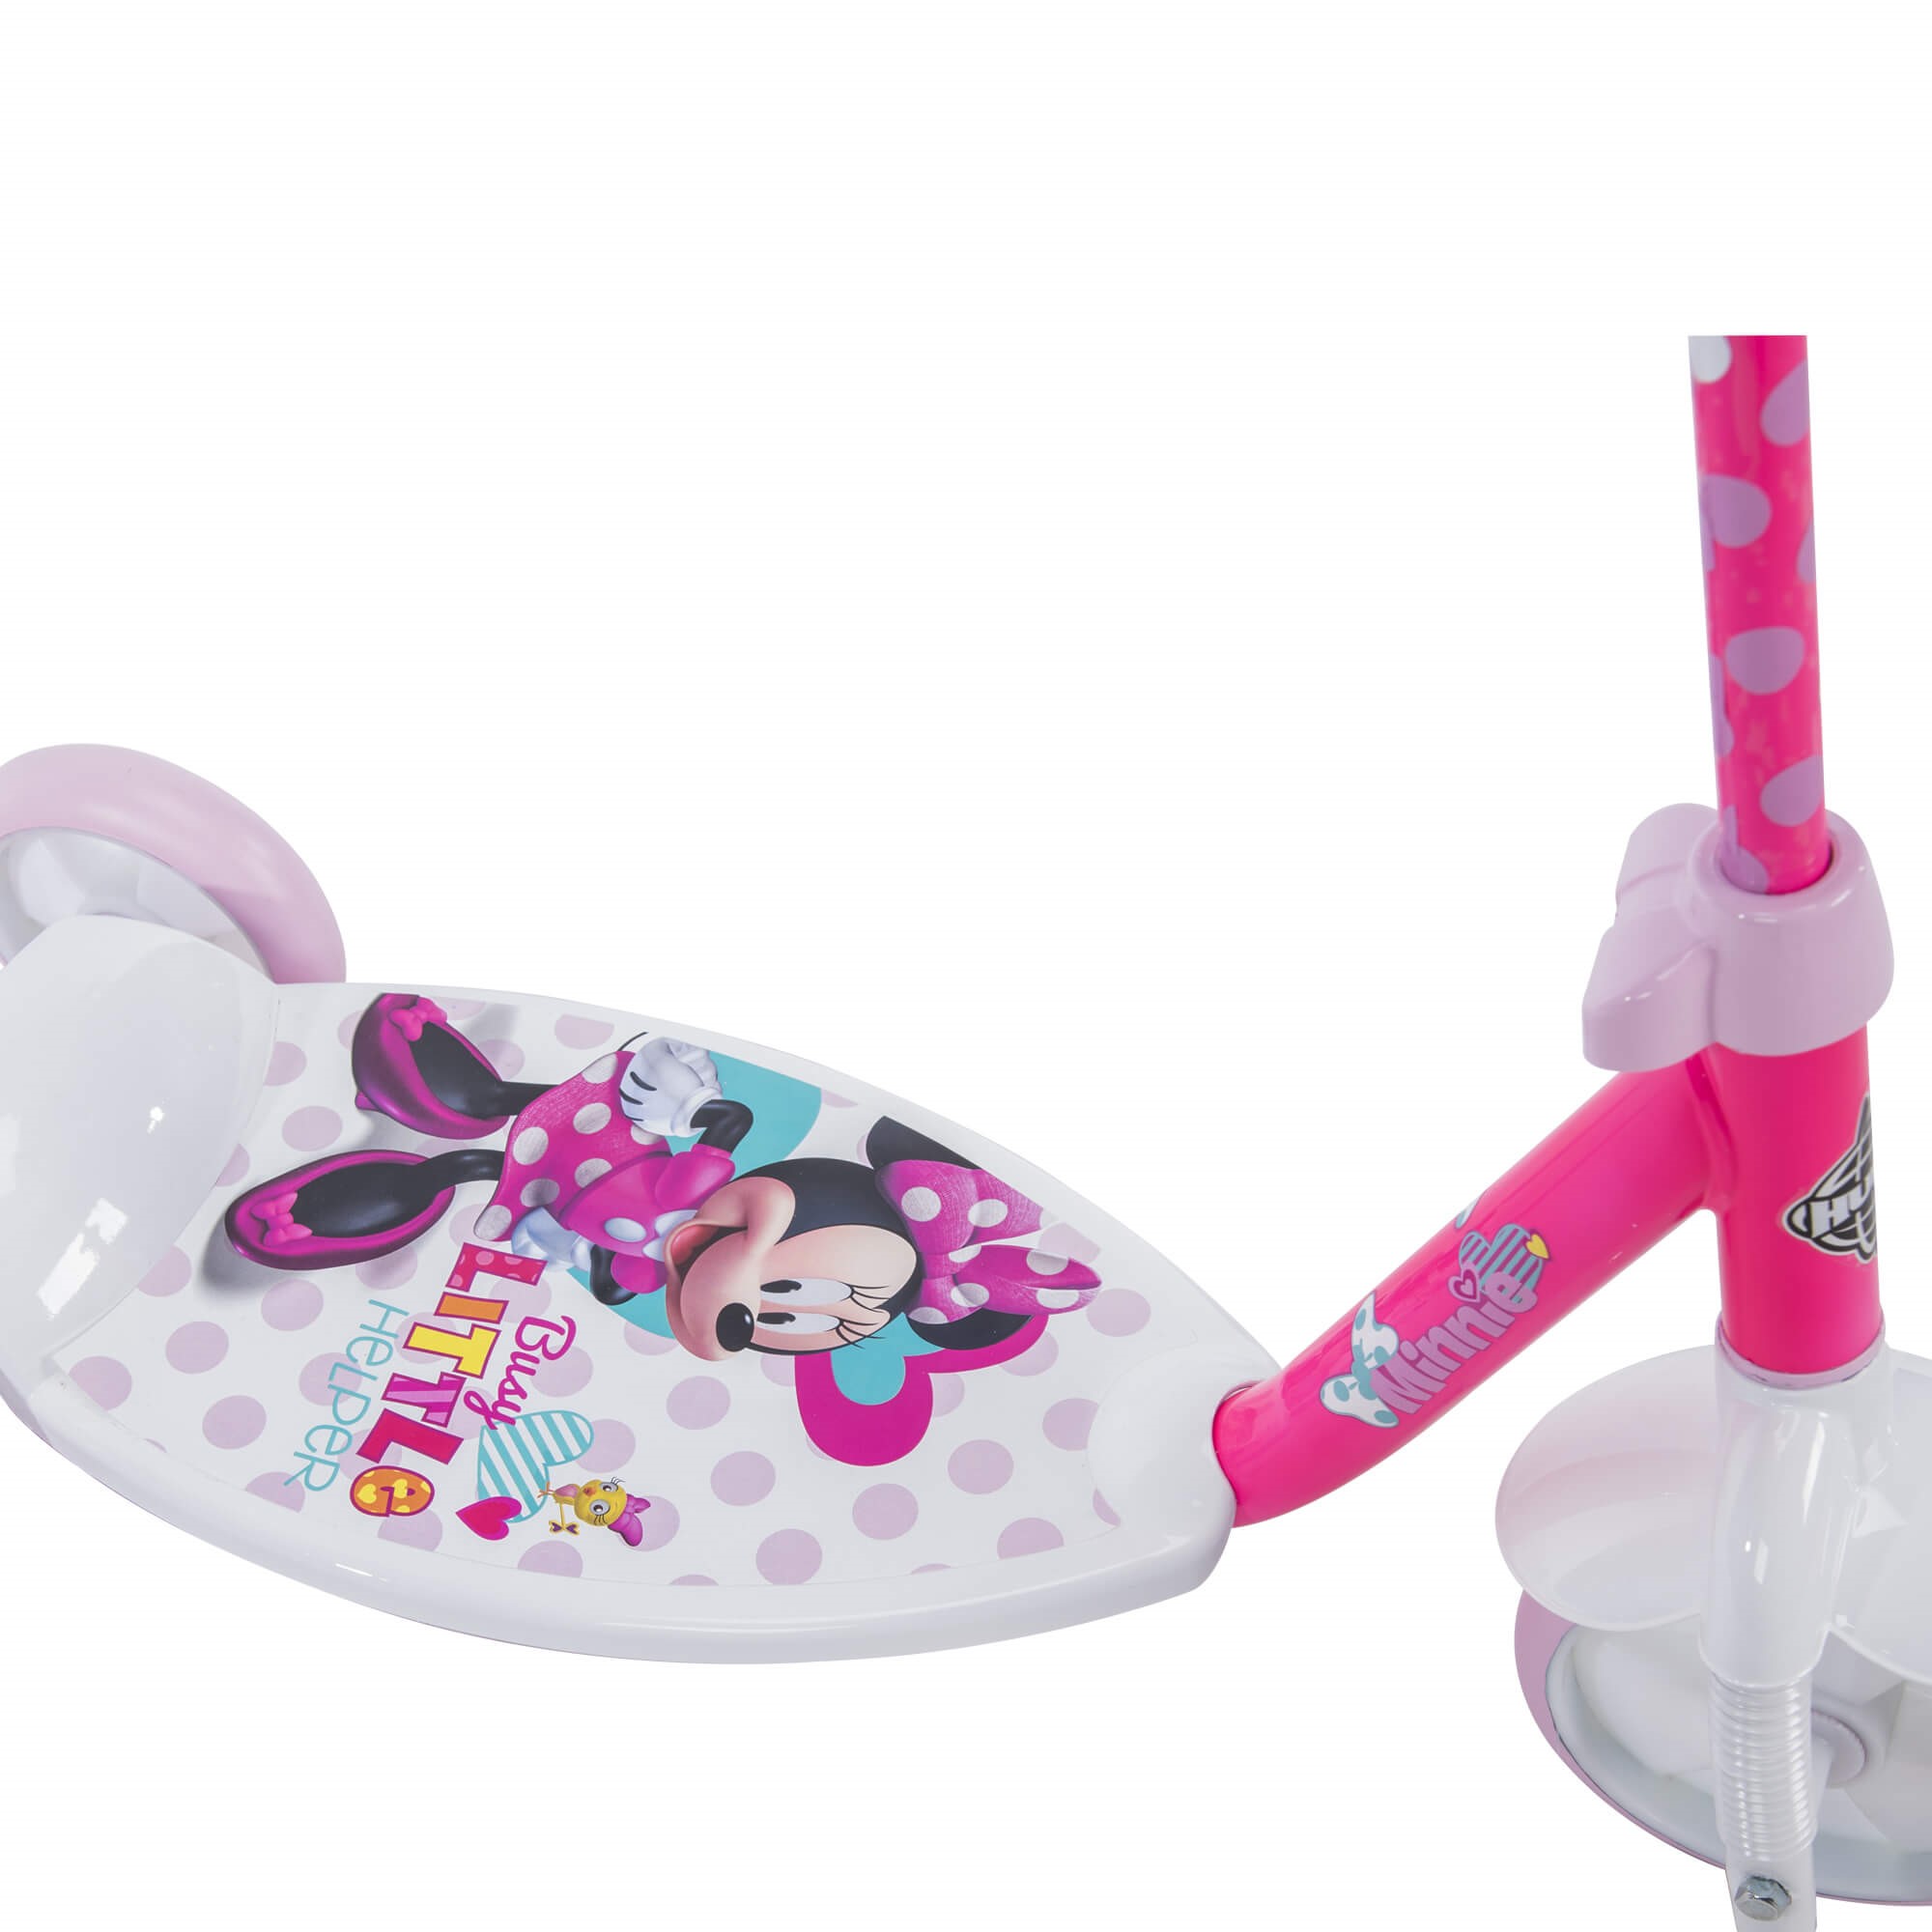 Disney Minnie Girls' 3-Wheel Pink Scooter, by Huffy - image 2 of 3